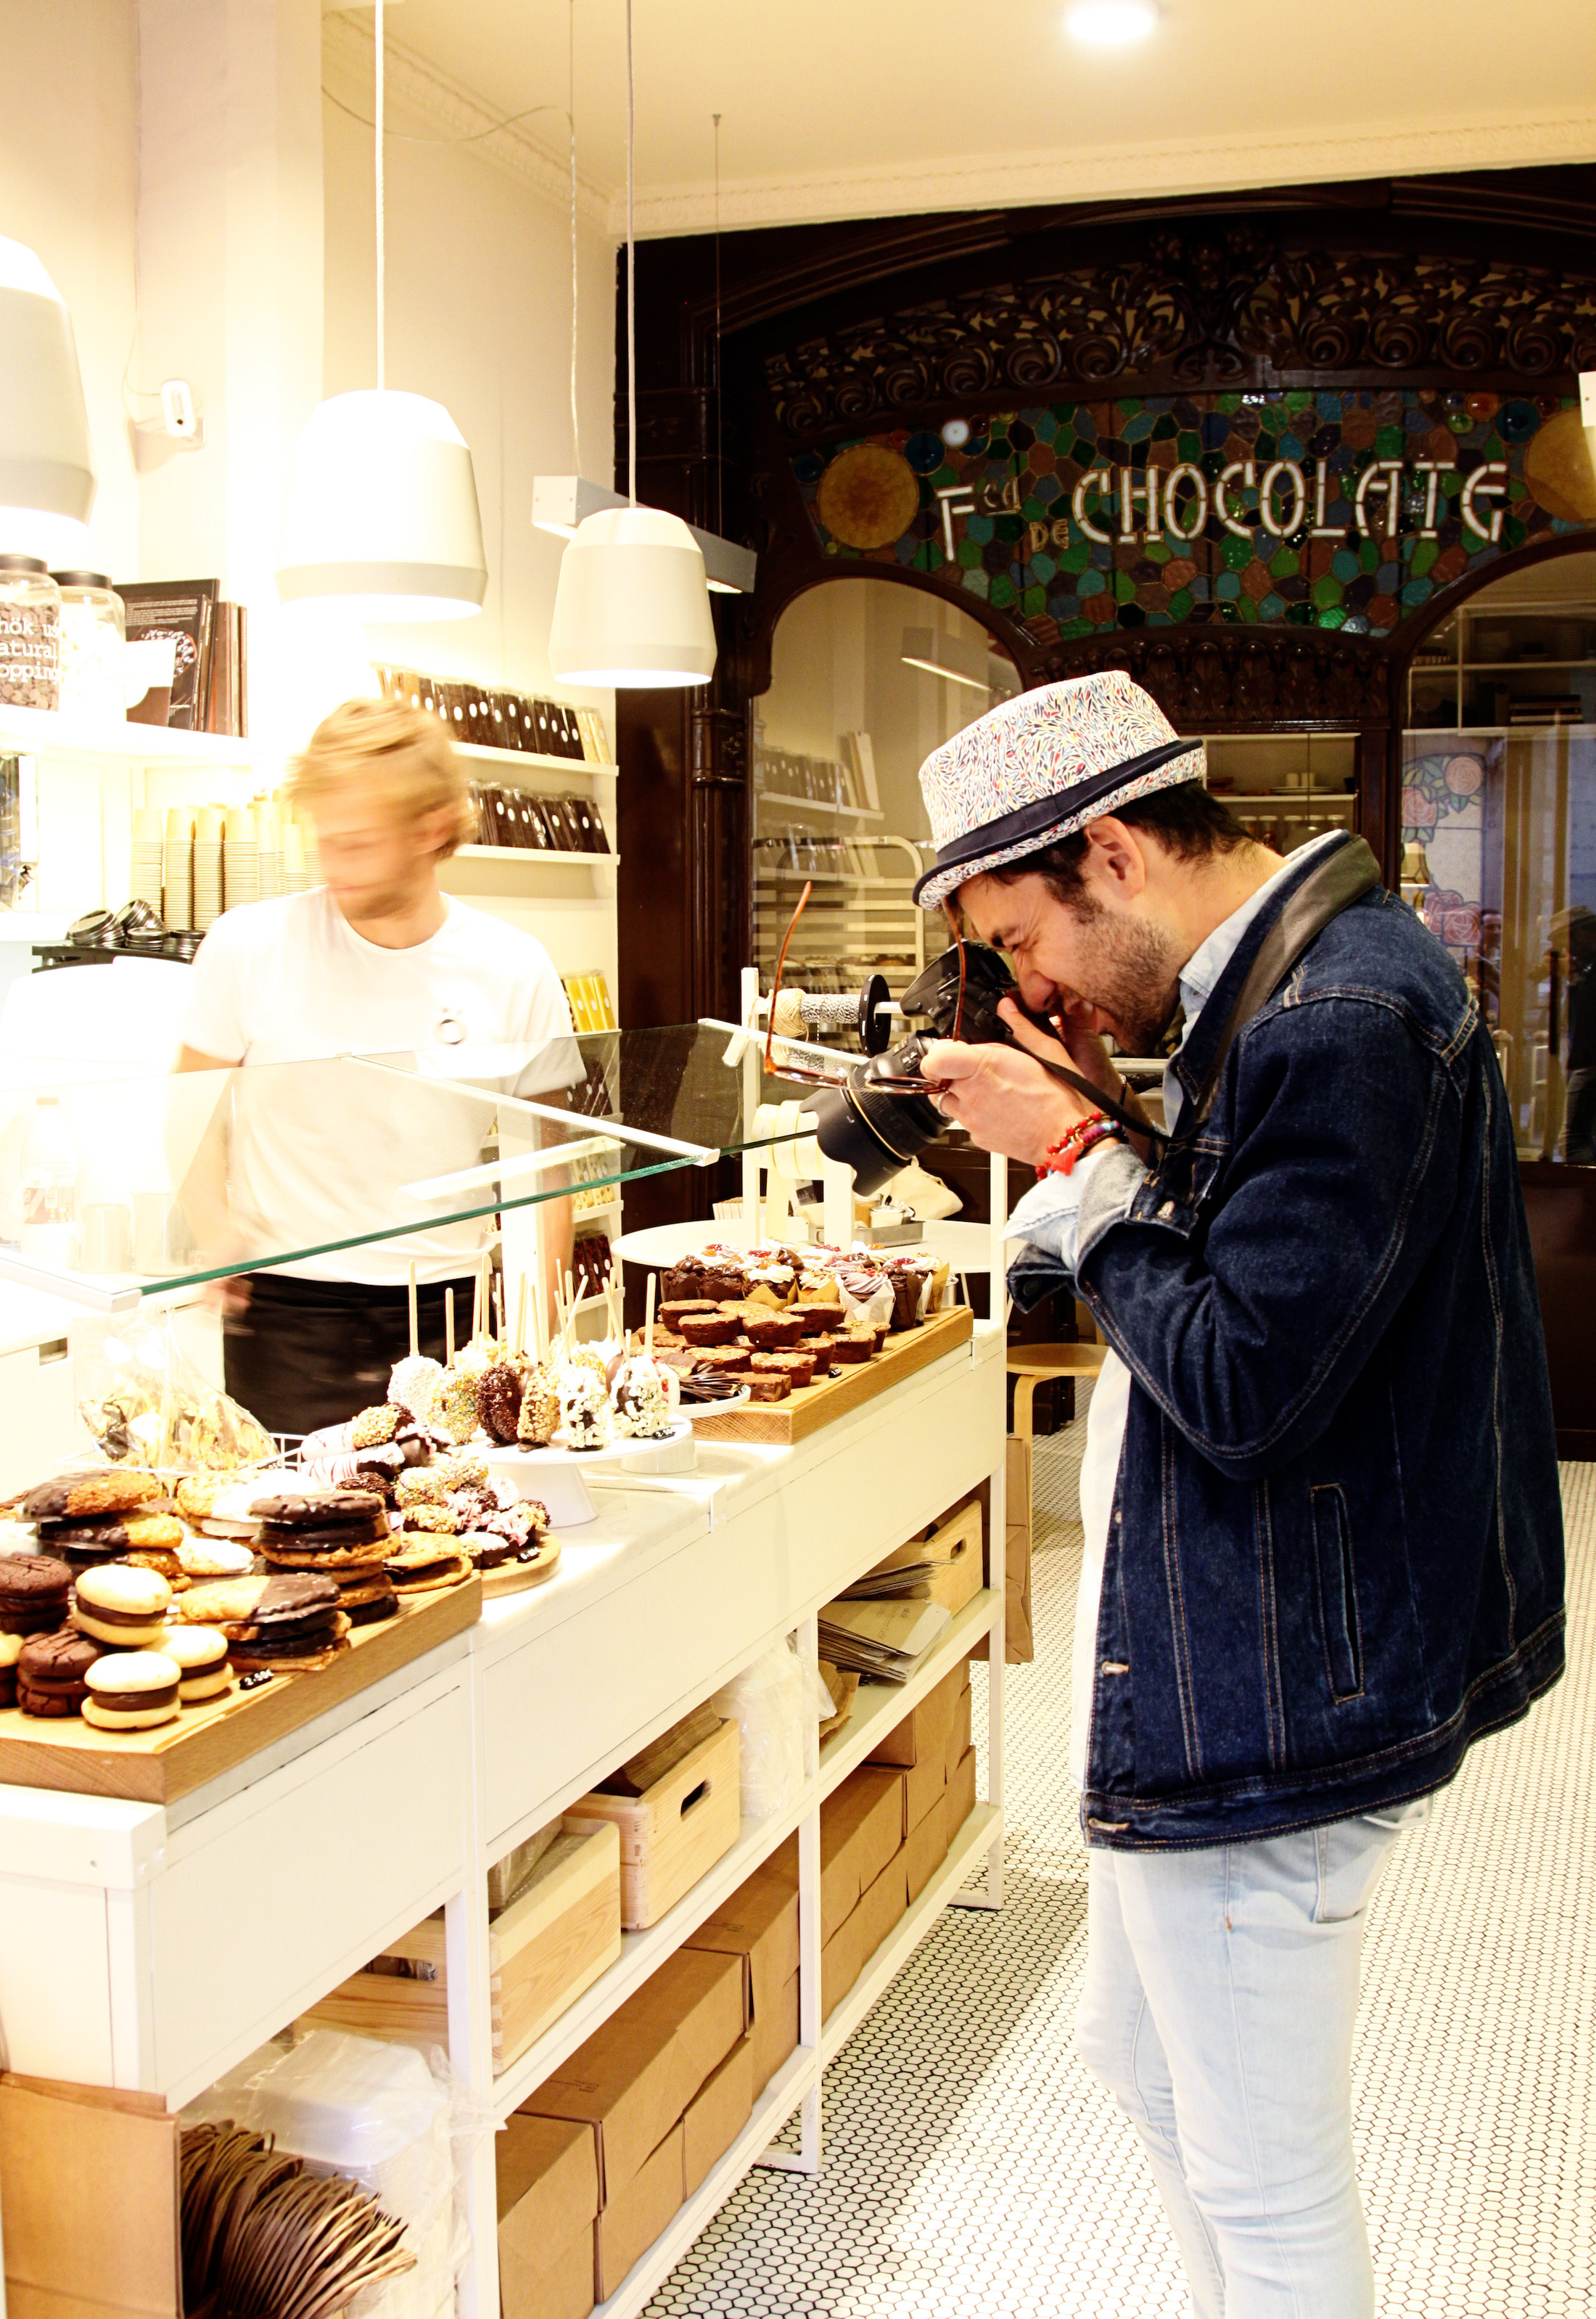  Chocolates and cronuts and pastries, oh my! At Chök Kitchen in the Raval. Captured by Michelle 